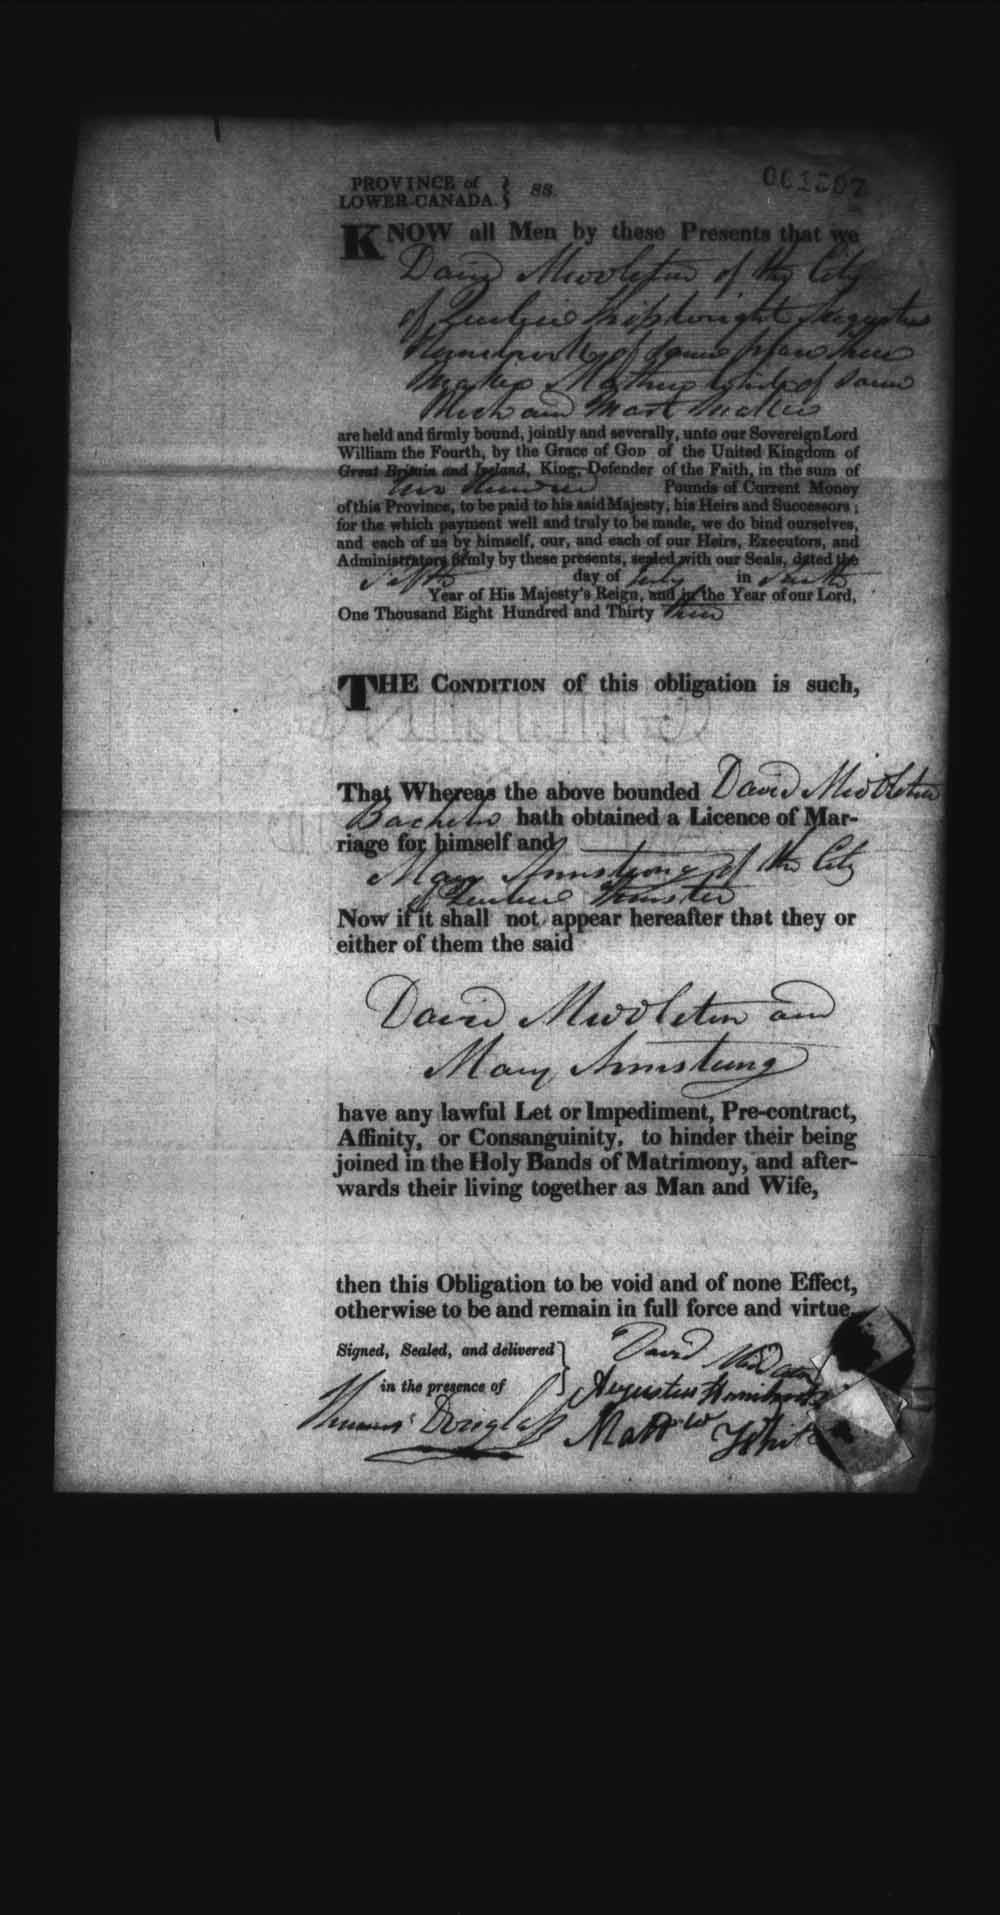 Digitized page of Upper and Lower Canada Marriage Bonds (1779-1865) for Image No.: e008237798